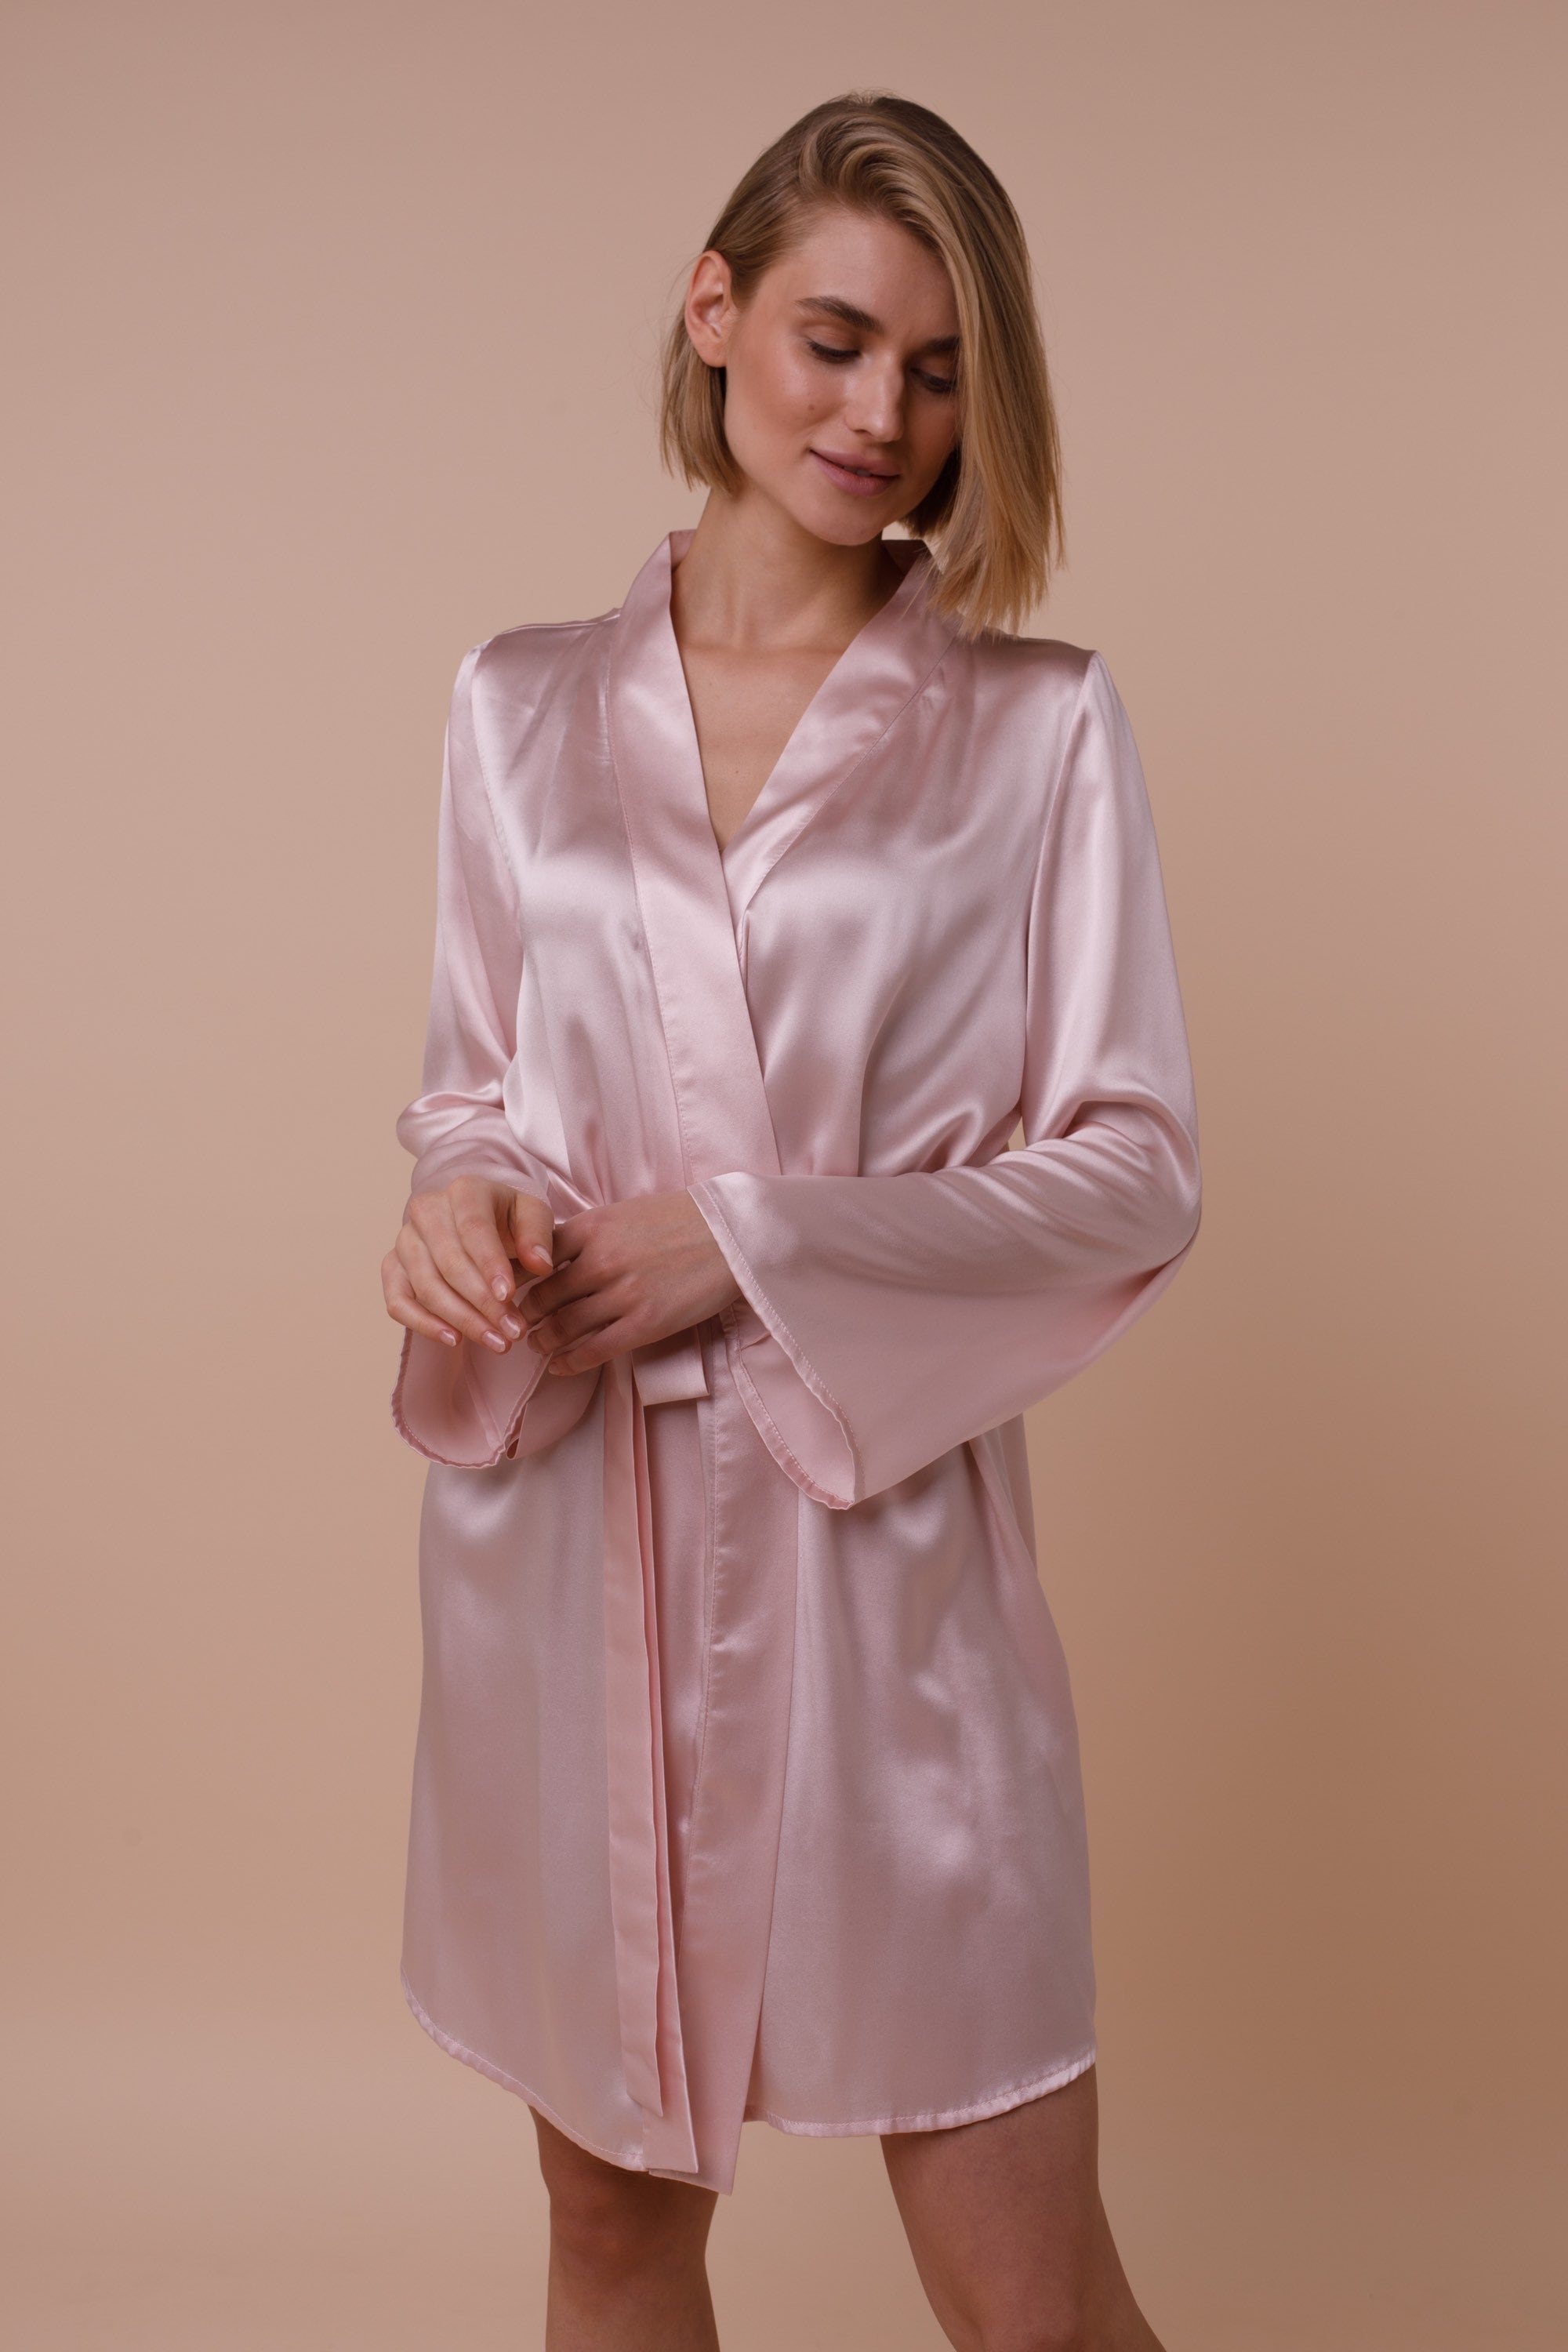 Woman Silk Pink Robe With Long Sleeves, Valentines Day Gift for Her - Etsy